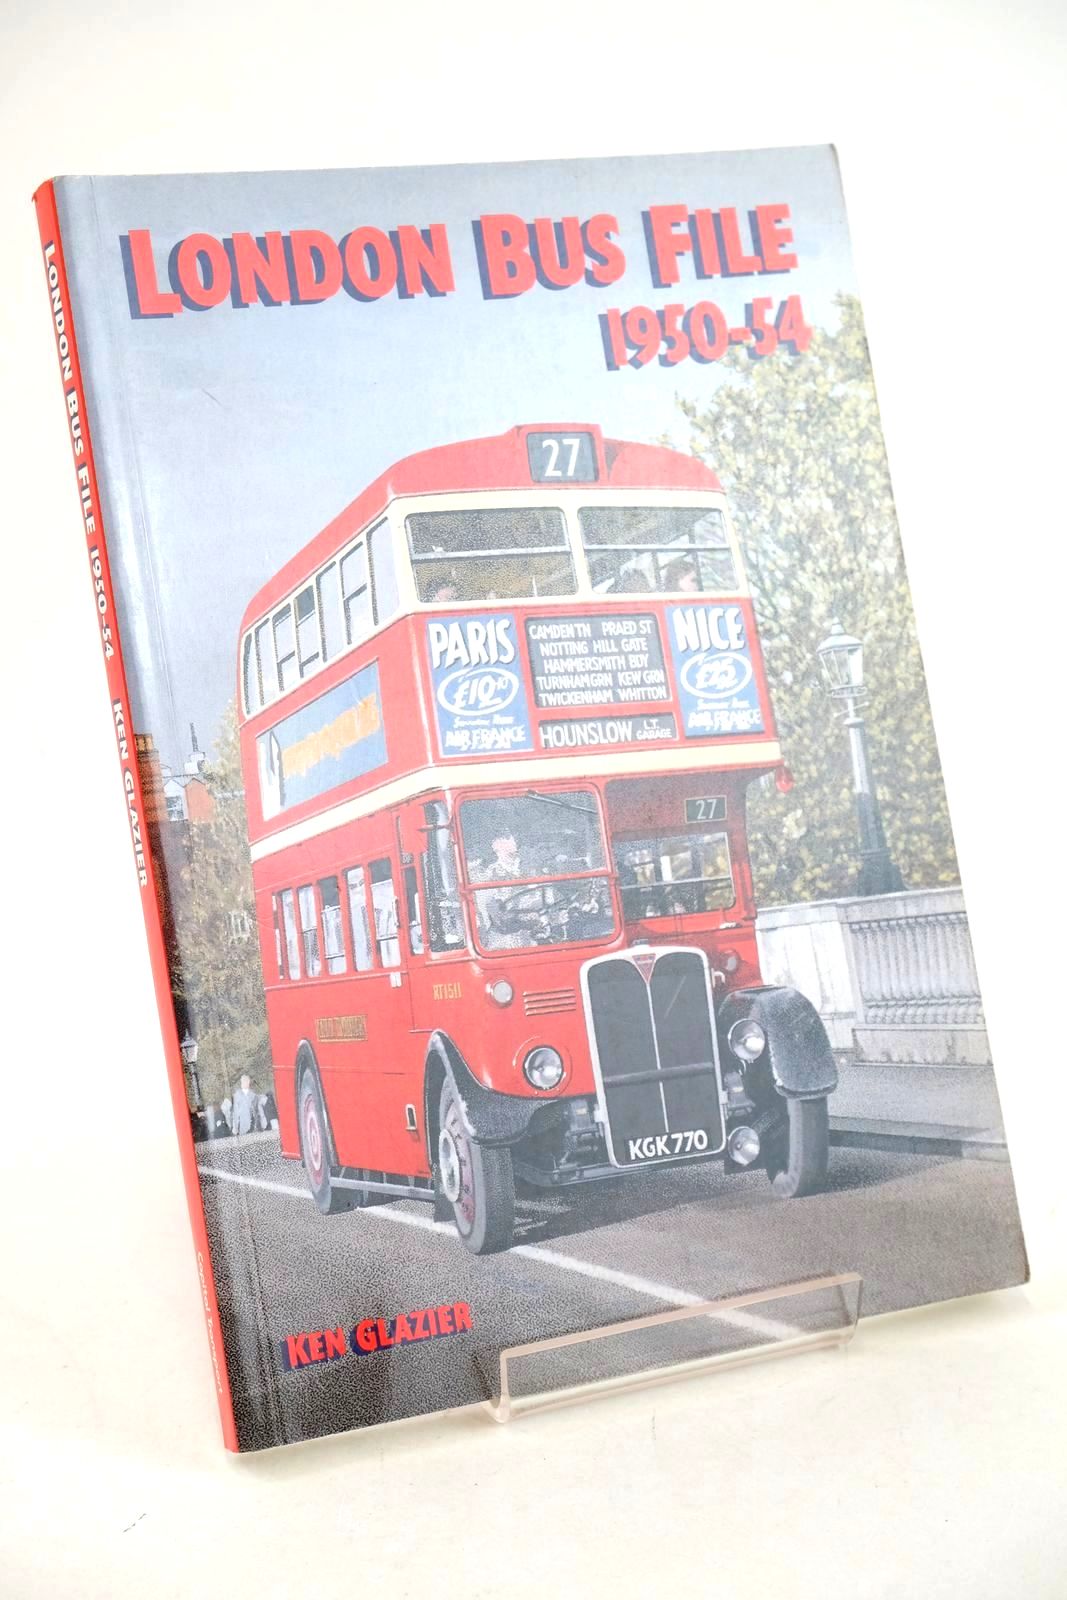 Photo of LONDON BUS FILE 1950-54- Stock Number: 1326930